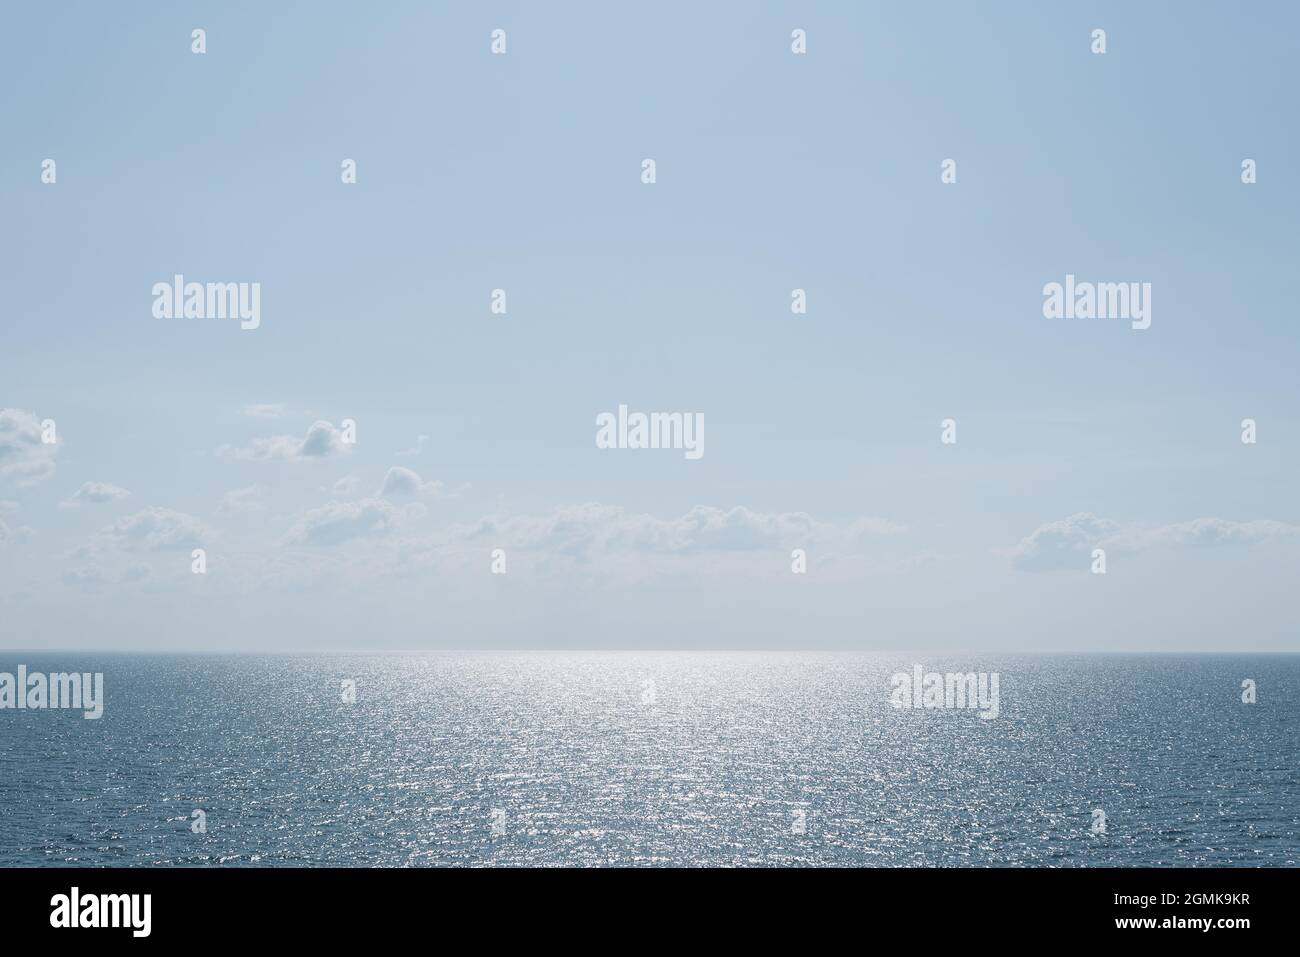 Natural background with minimalist sea and sky views in gentle blue Stock Photo